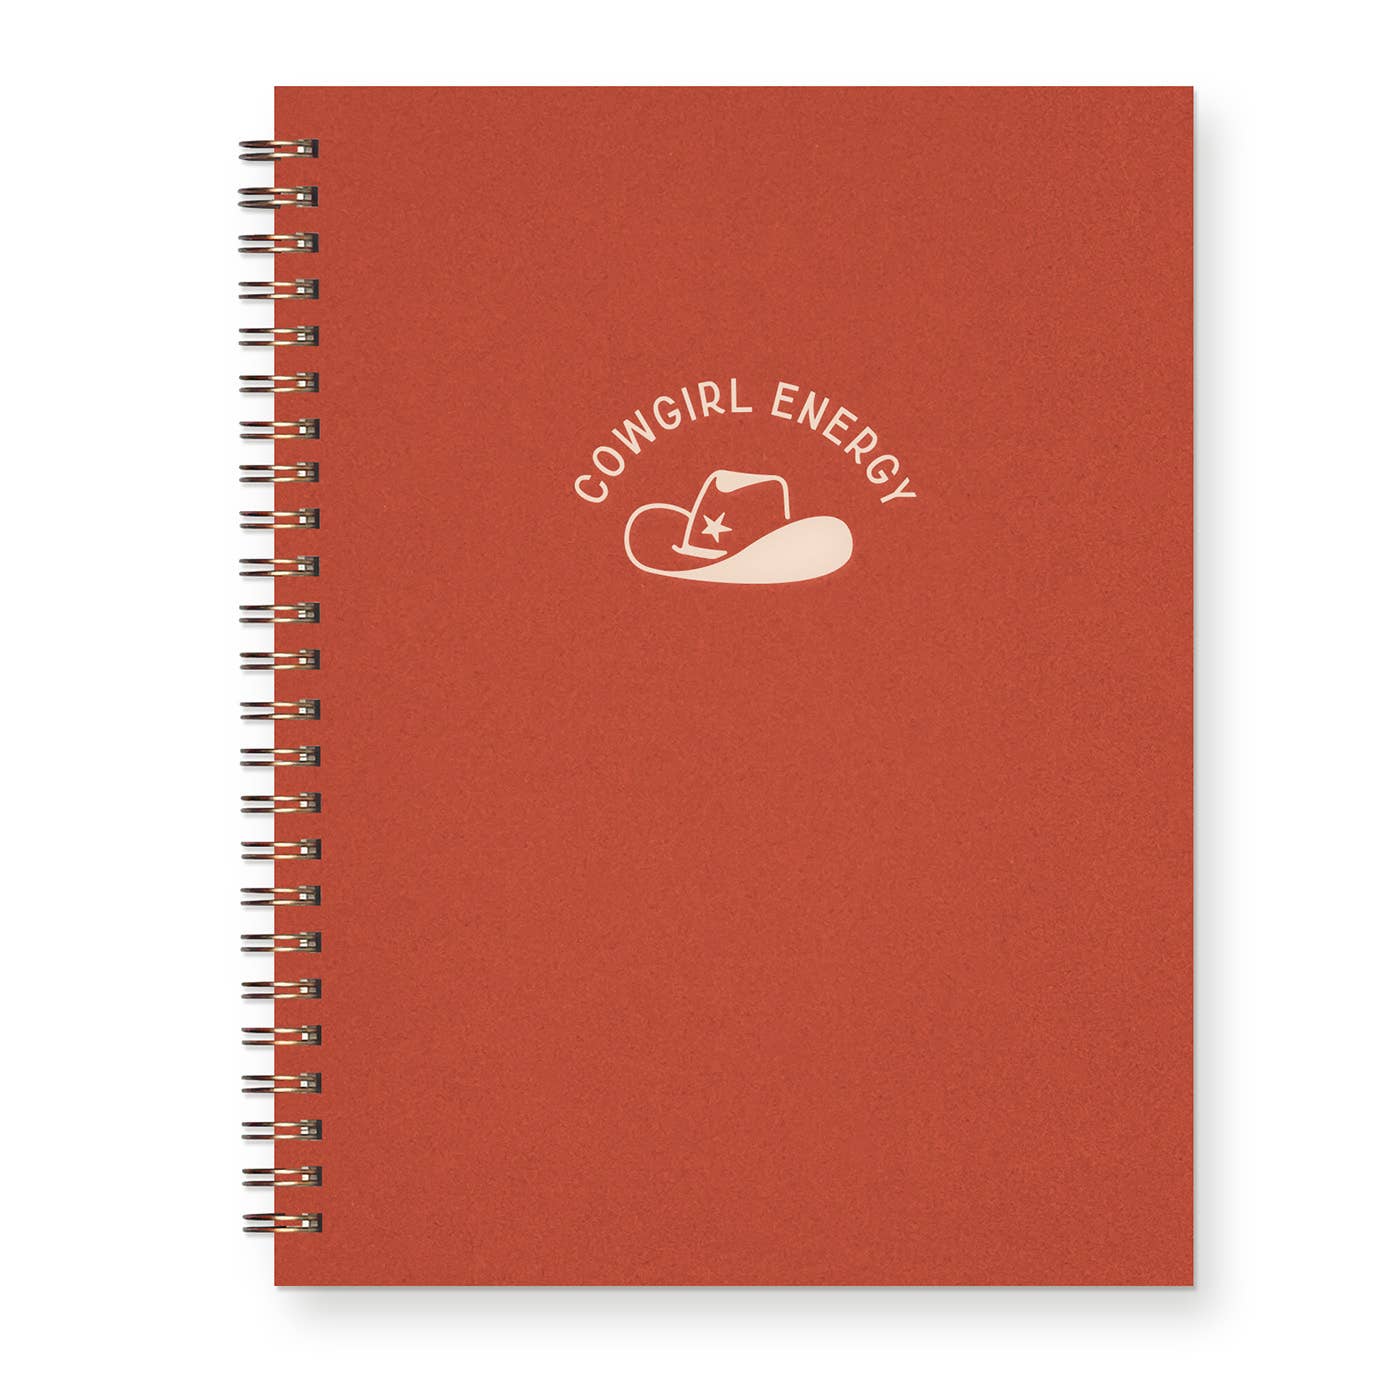 Ruff House Print Shop - Cowgirl Energy Journal: Lined Notebook